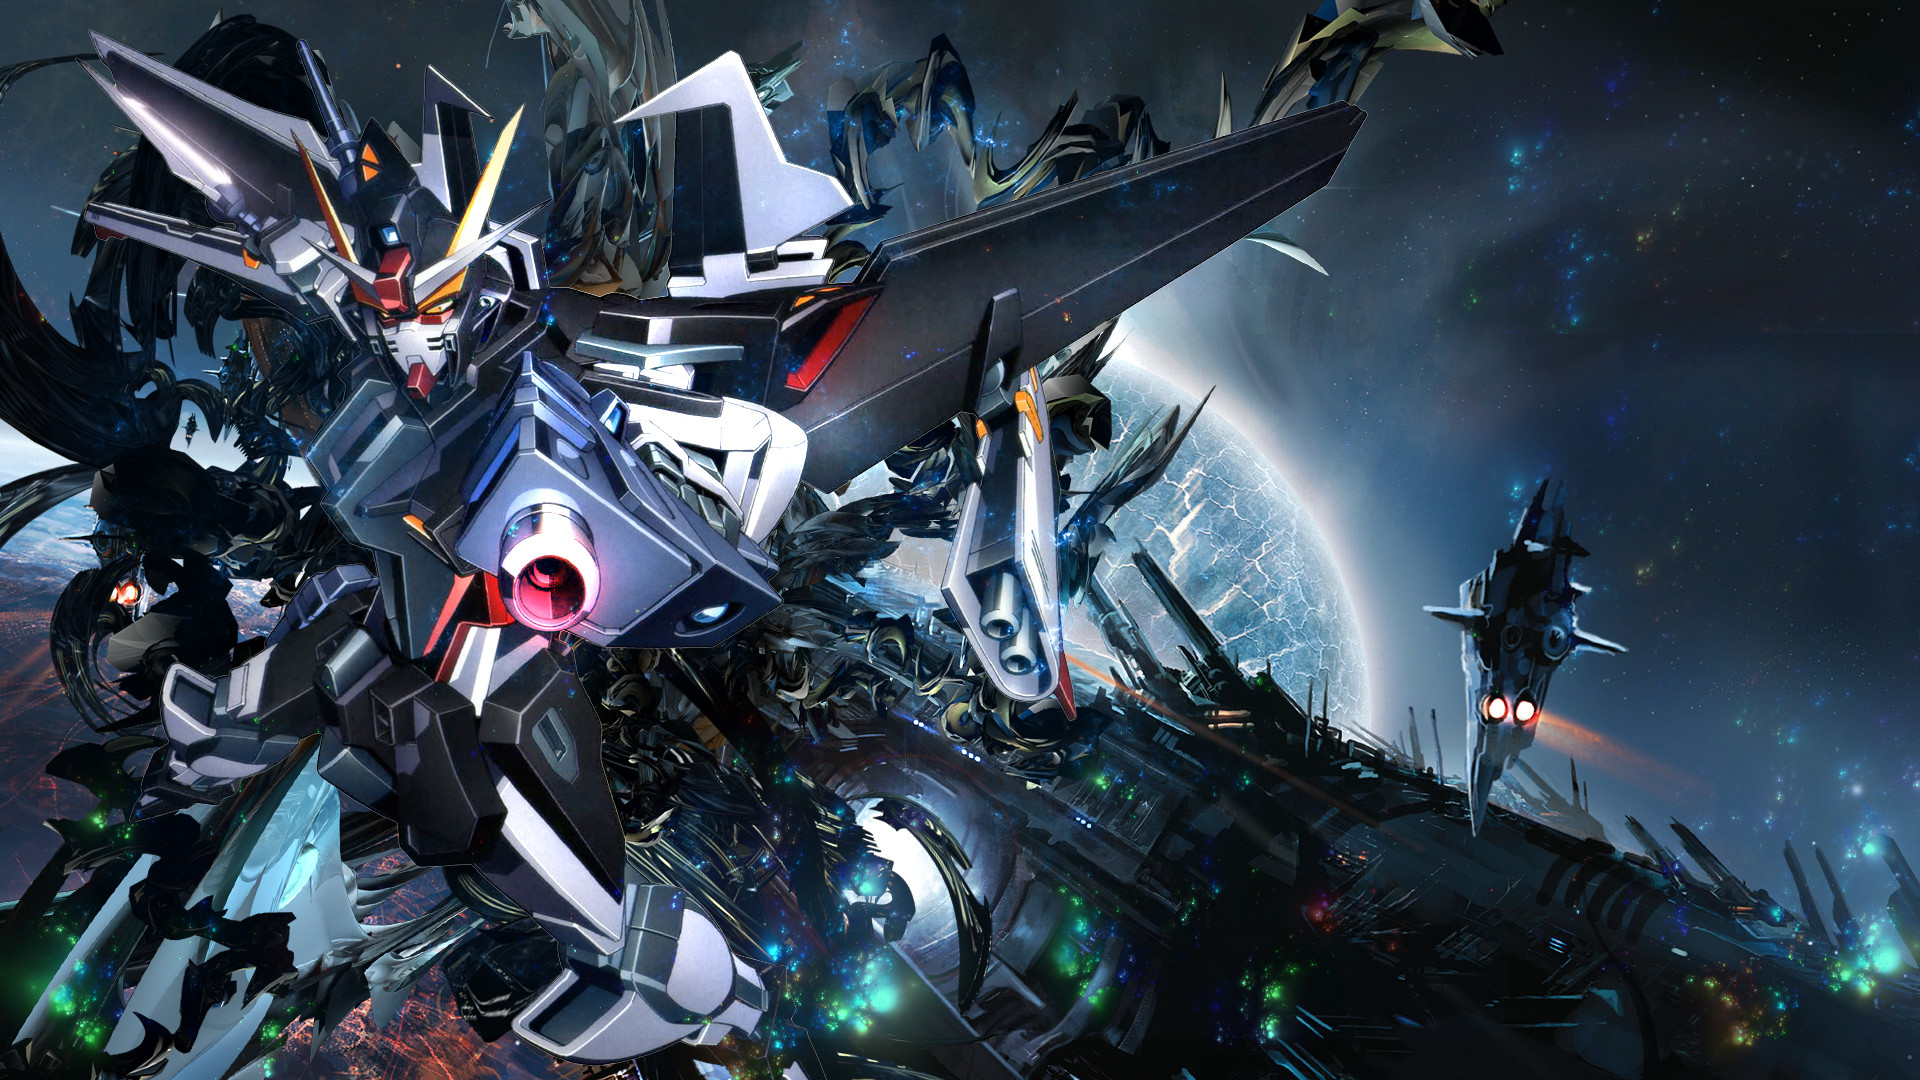 Gundam' in Davao: Chickenjoy, familiar PH brand in new images of anime film  | ABS-CBN News